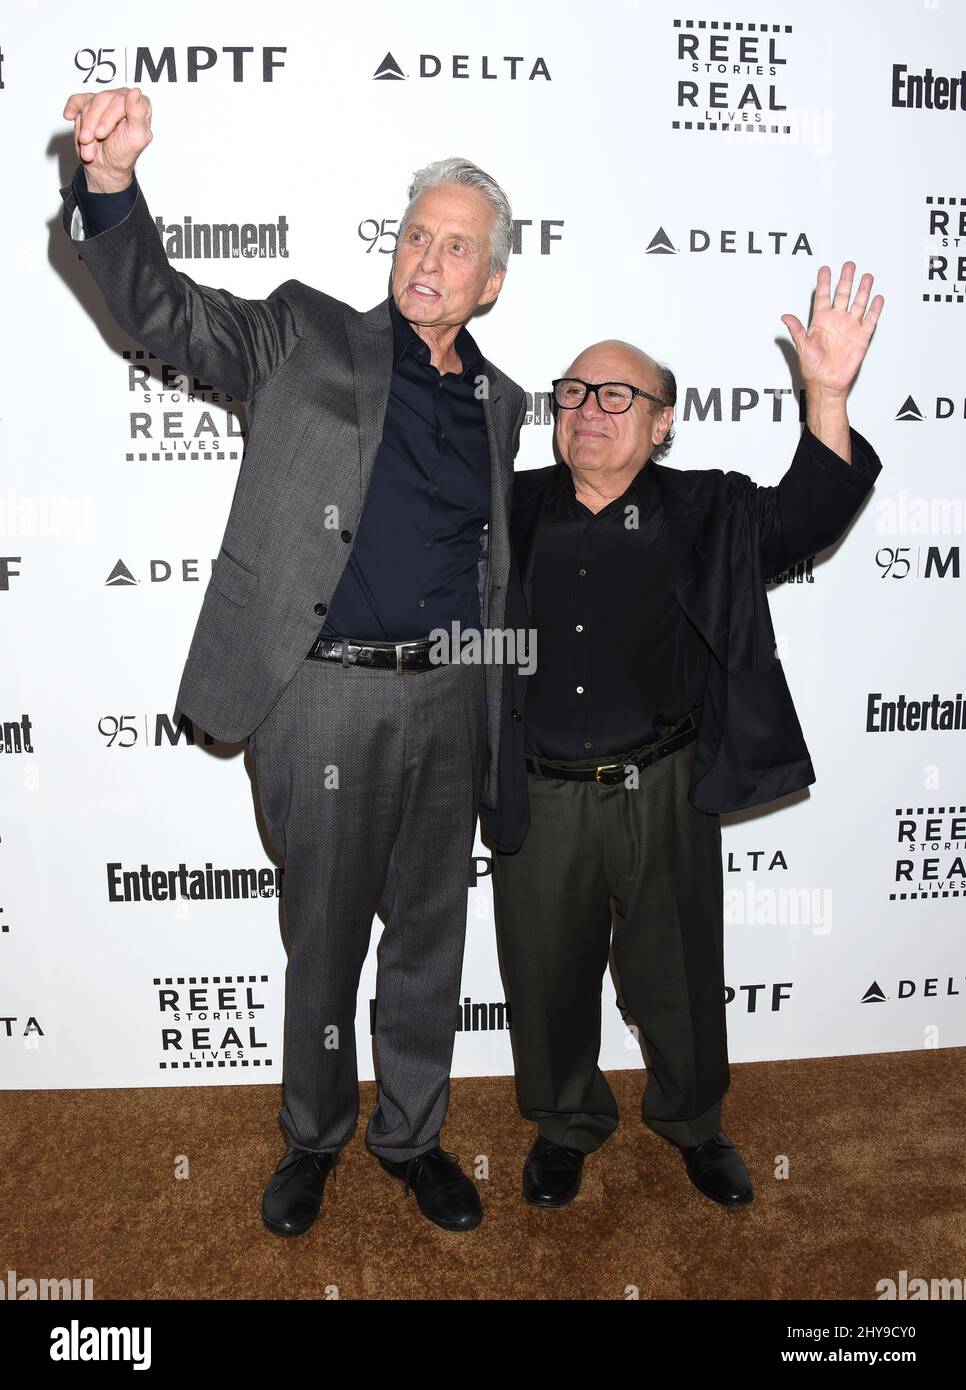 Michael Douglas and Danny DeVito arrives at the 5th Annual Reel Stories, Real Lives Benefit at Milk Studios on Thursday, April 7, 2016, in Los Angeles. Stock Photo